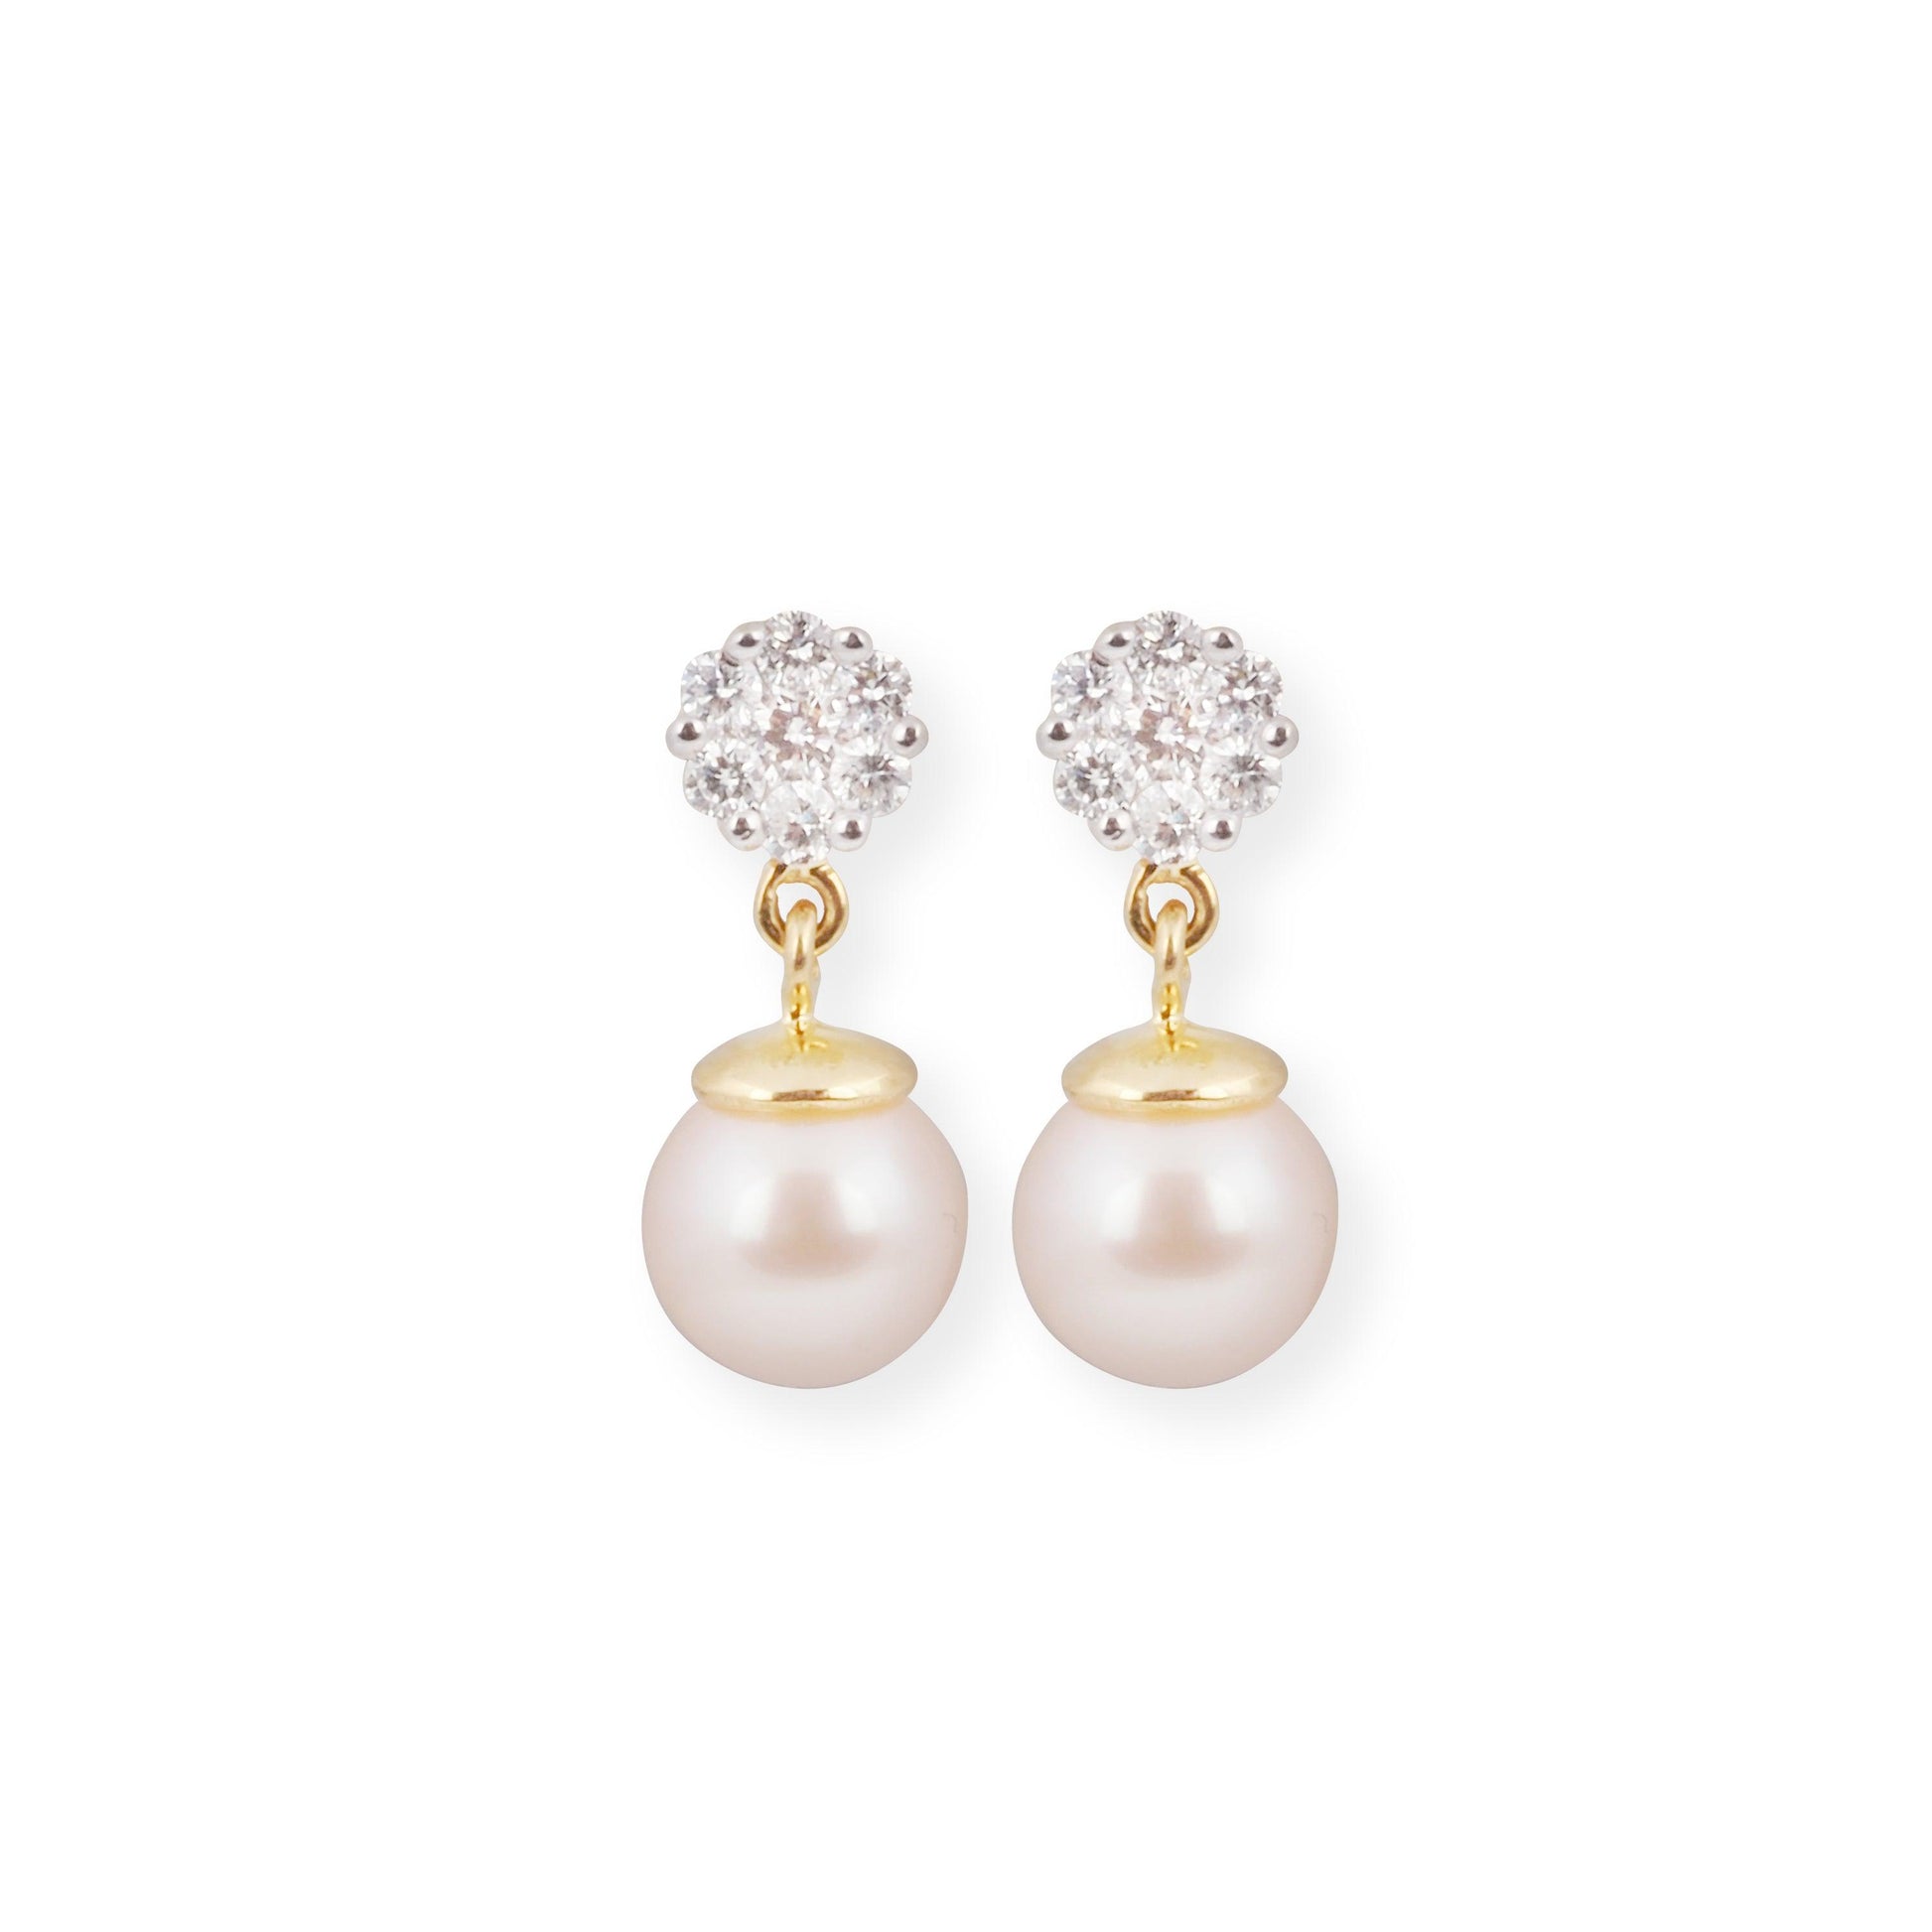 18ct Yellow Gold Diamond Earrings with Cultured Pearl Drop and Screw Back MCS6297 - Minar Jewellers